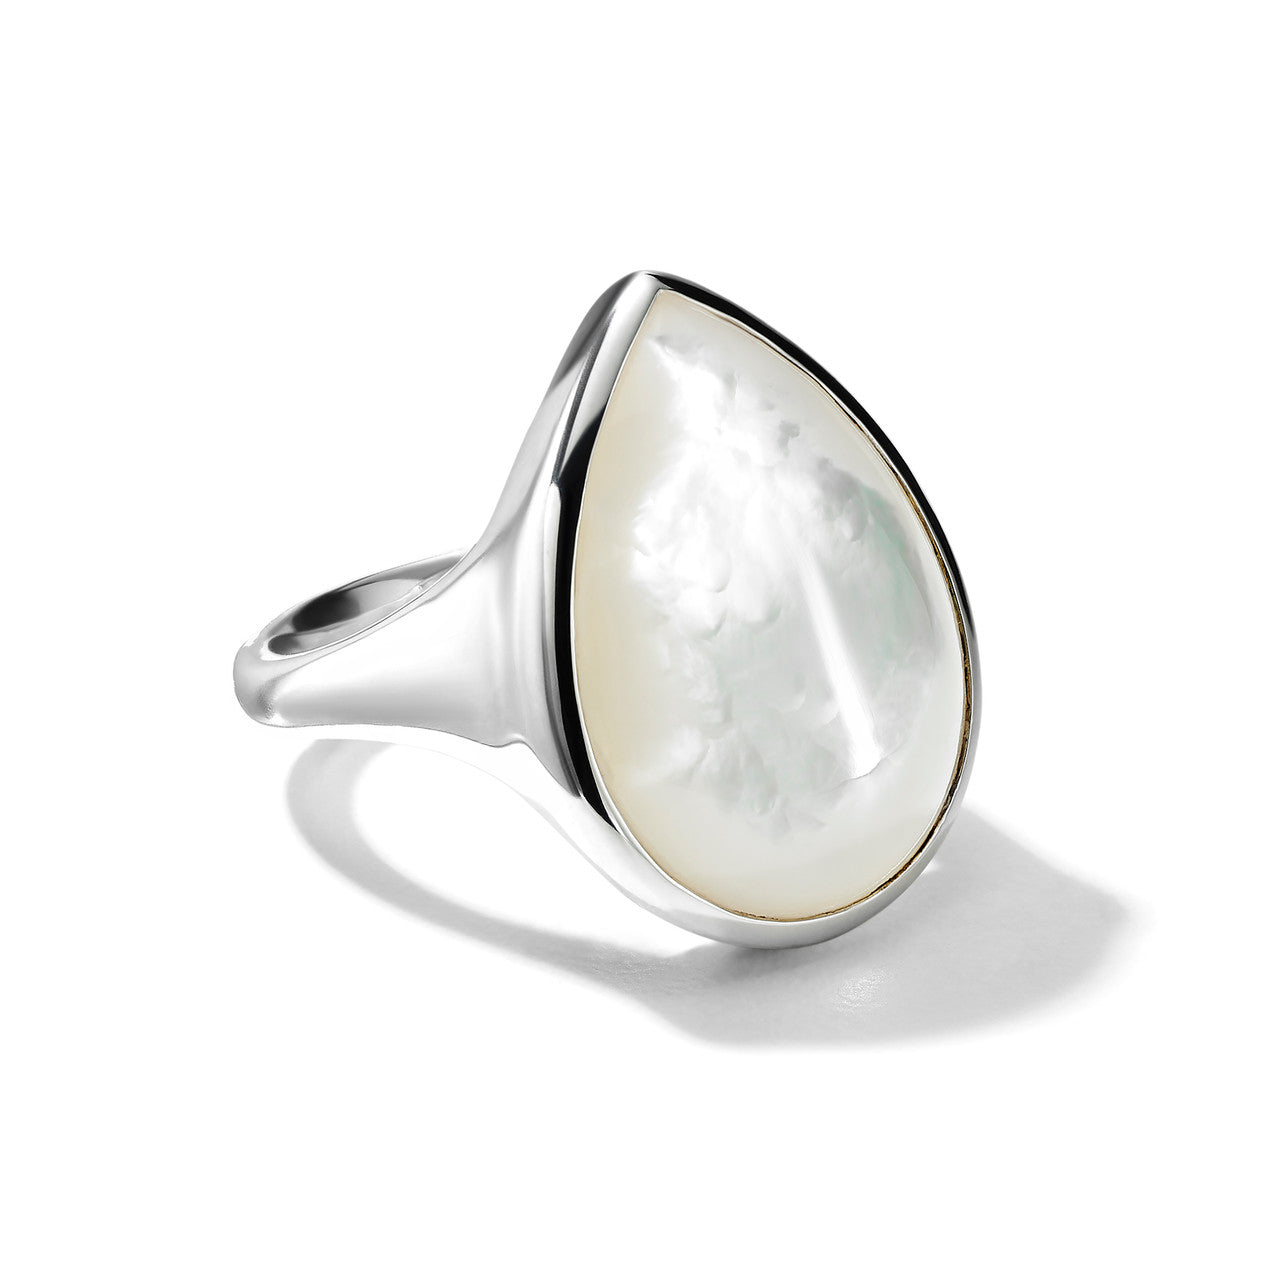 Polished Rock Candy Sculptured Teardrop Ring in Mother of Pearl